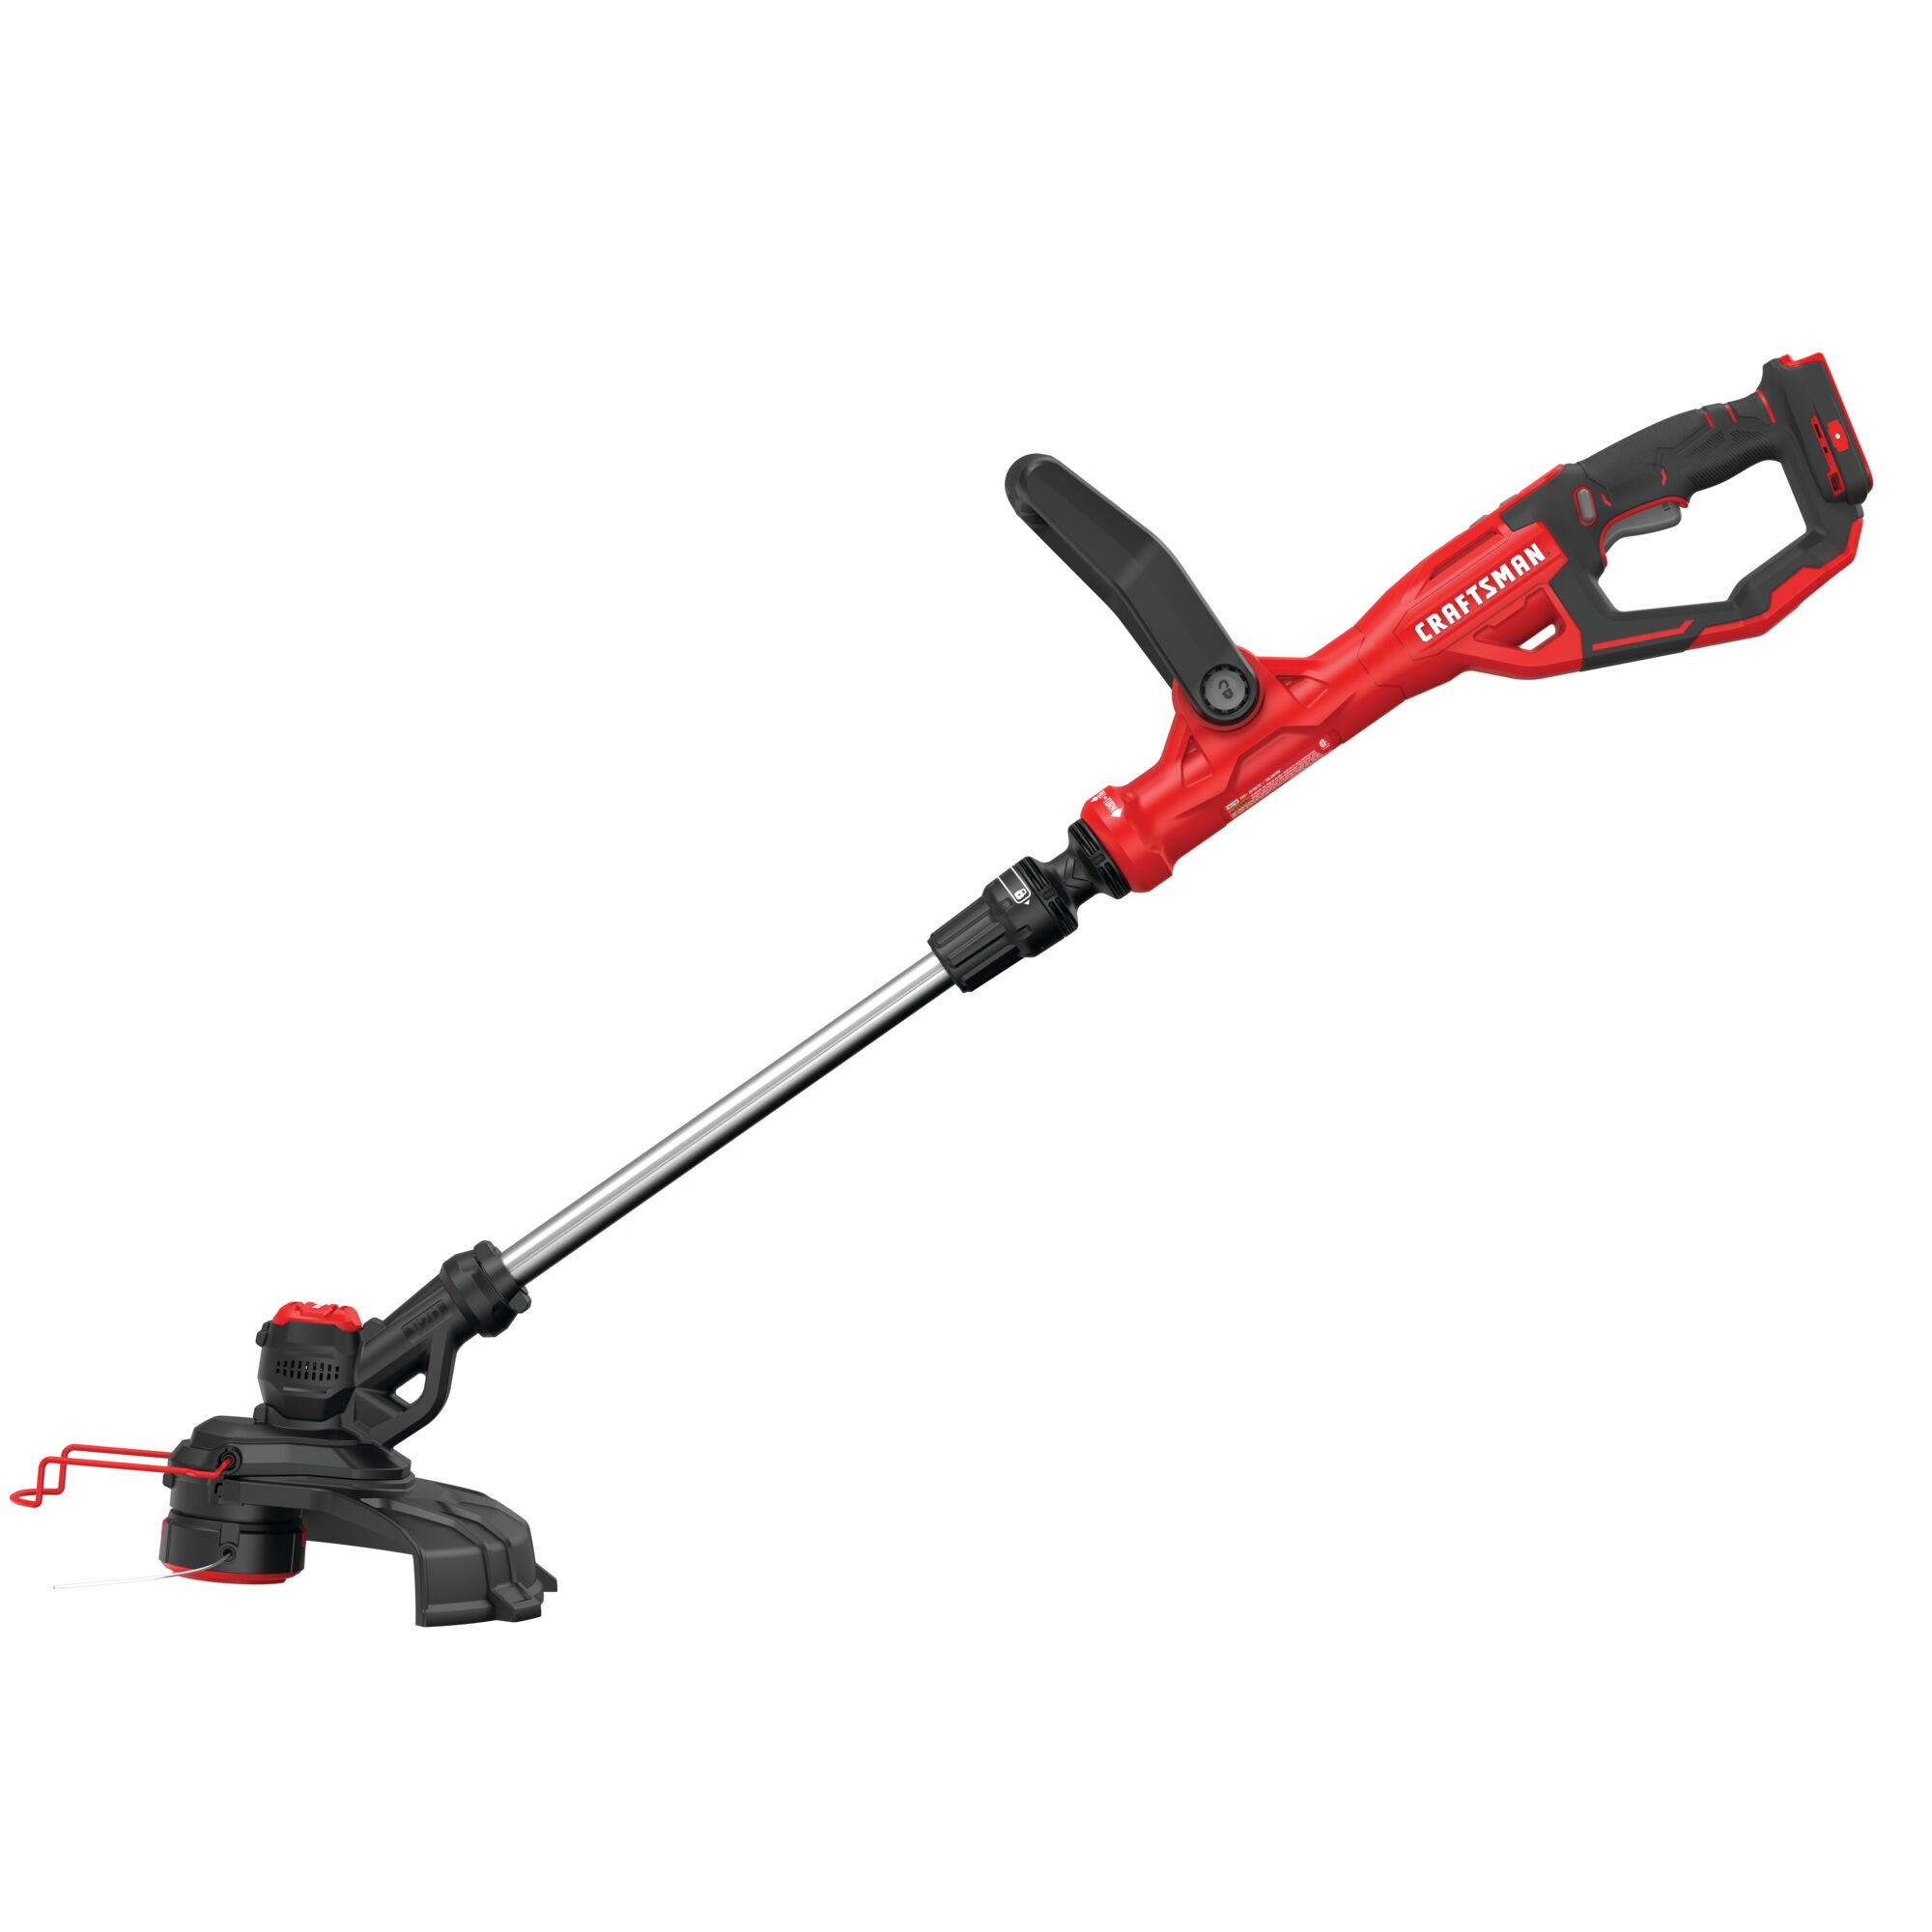 20 volt weedwacker 13 inch cordless string trimmer and edger with automatic feed kit.